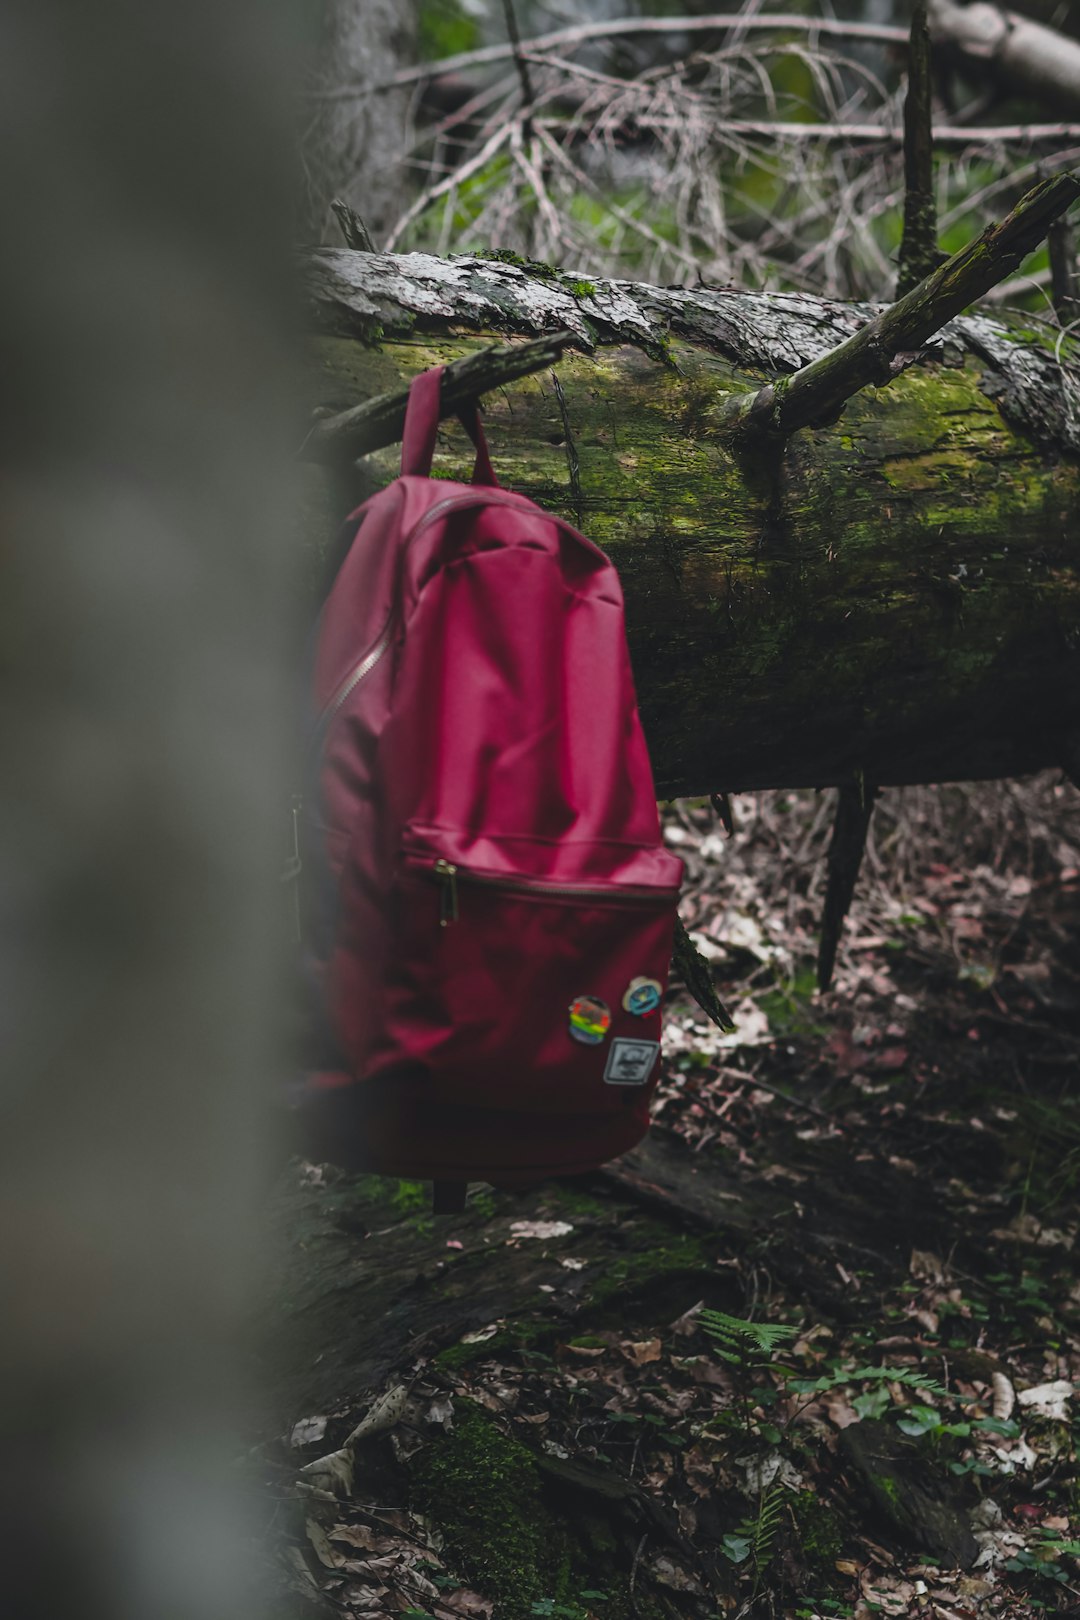 red and black backpack on tree branch